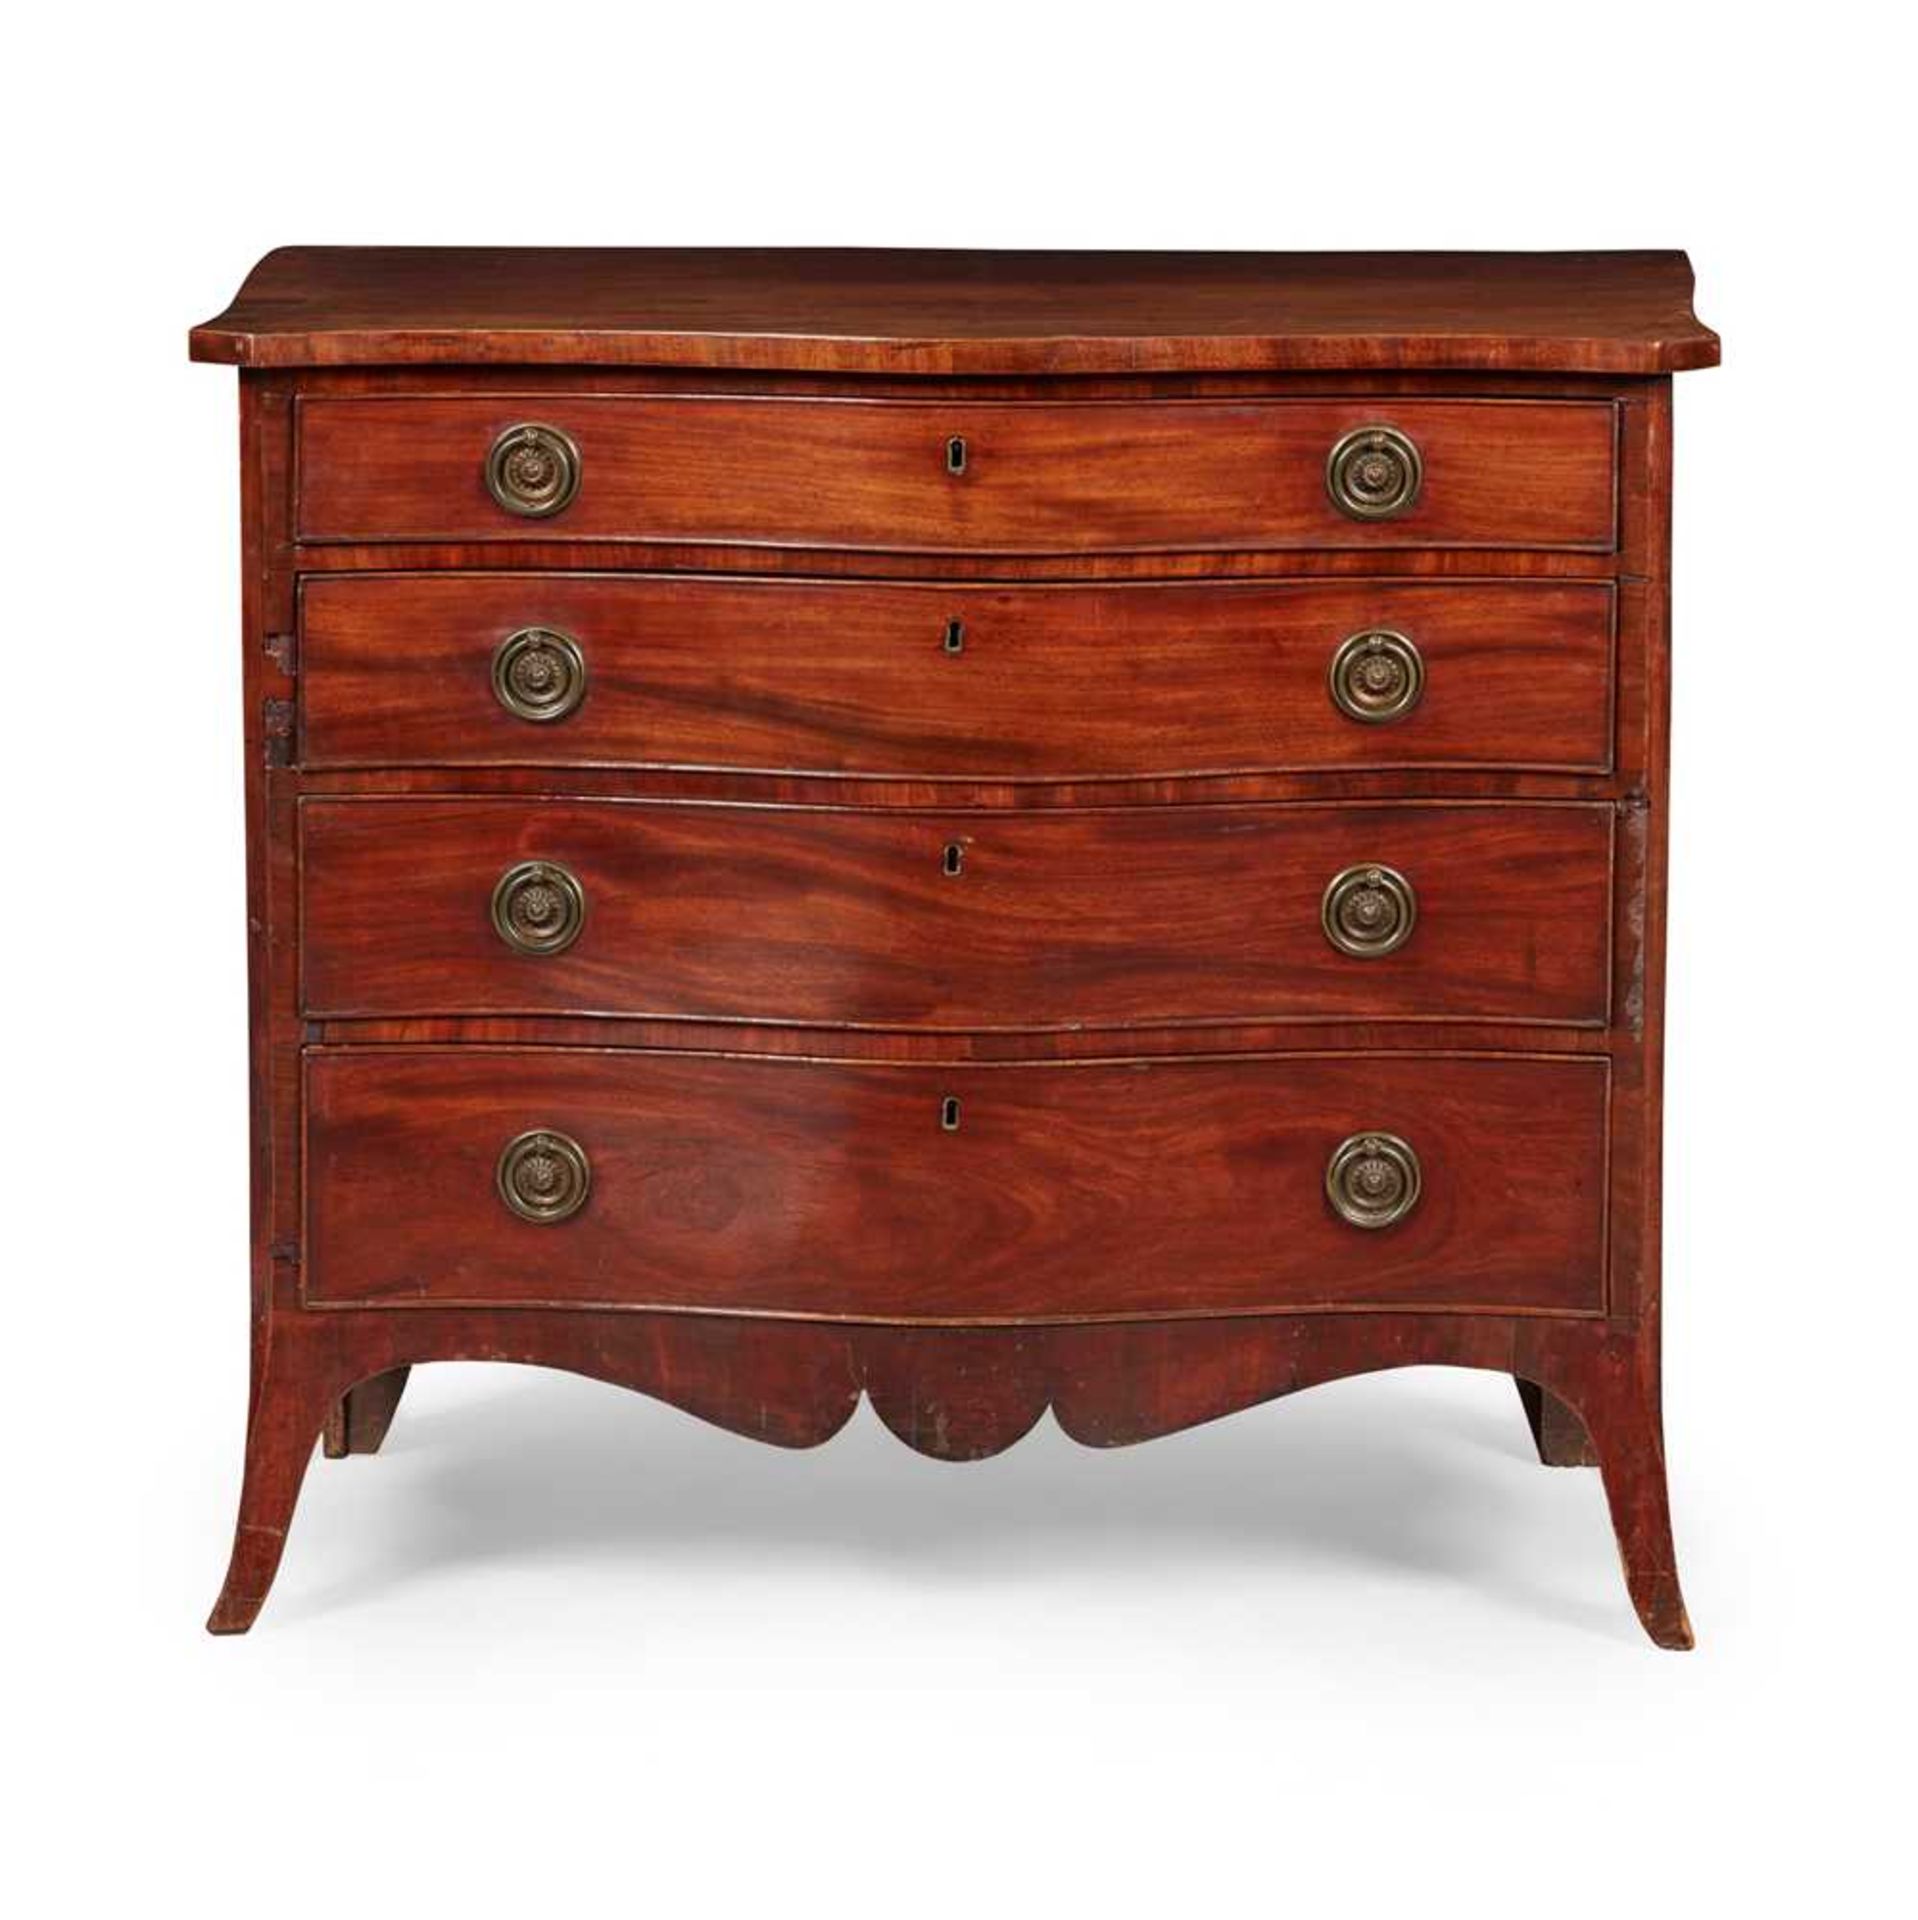 LATE GEORGE III MAHOGANY SERPENTINE CHEST OF DRAWERS LATE 18TH CENTURY